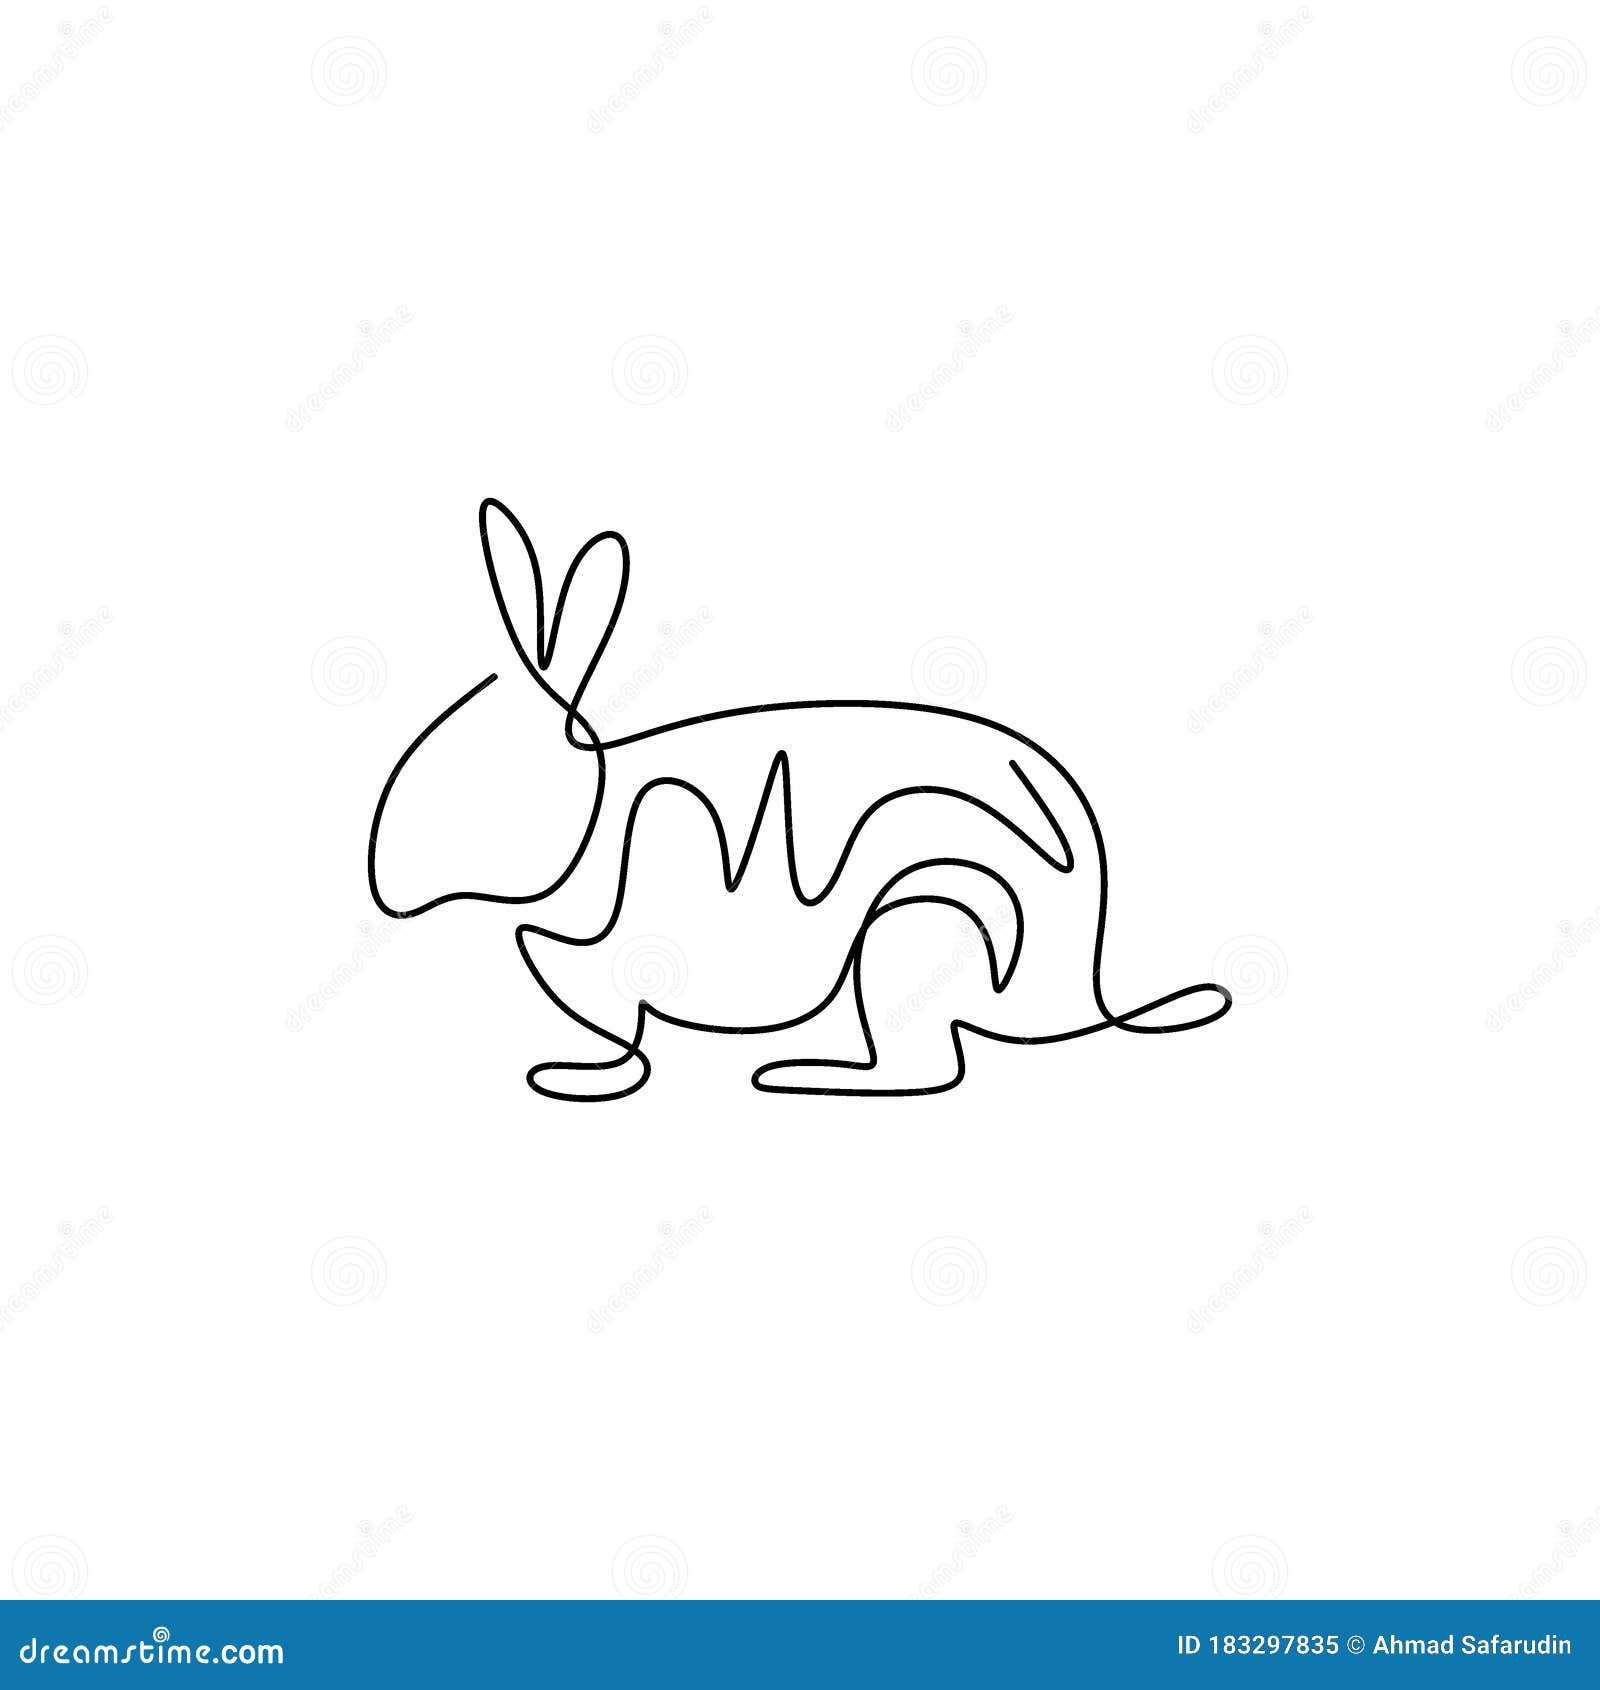 Continuous Line Drawing of Easter Rabbit. One Line Art Rabbit Logo. Cute  Bunny Symbol Farm Animals. Pet Animal Concept Stock Vector - Illustration  of contour, line: 183297835